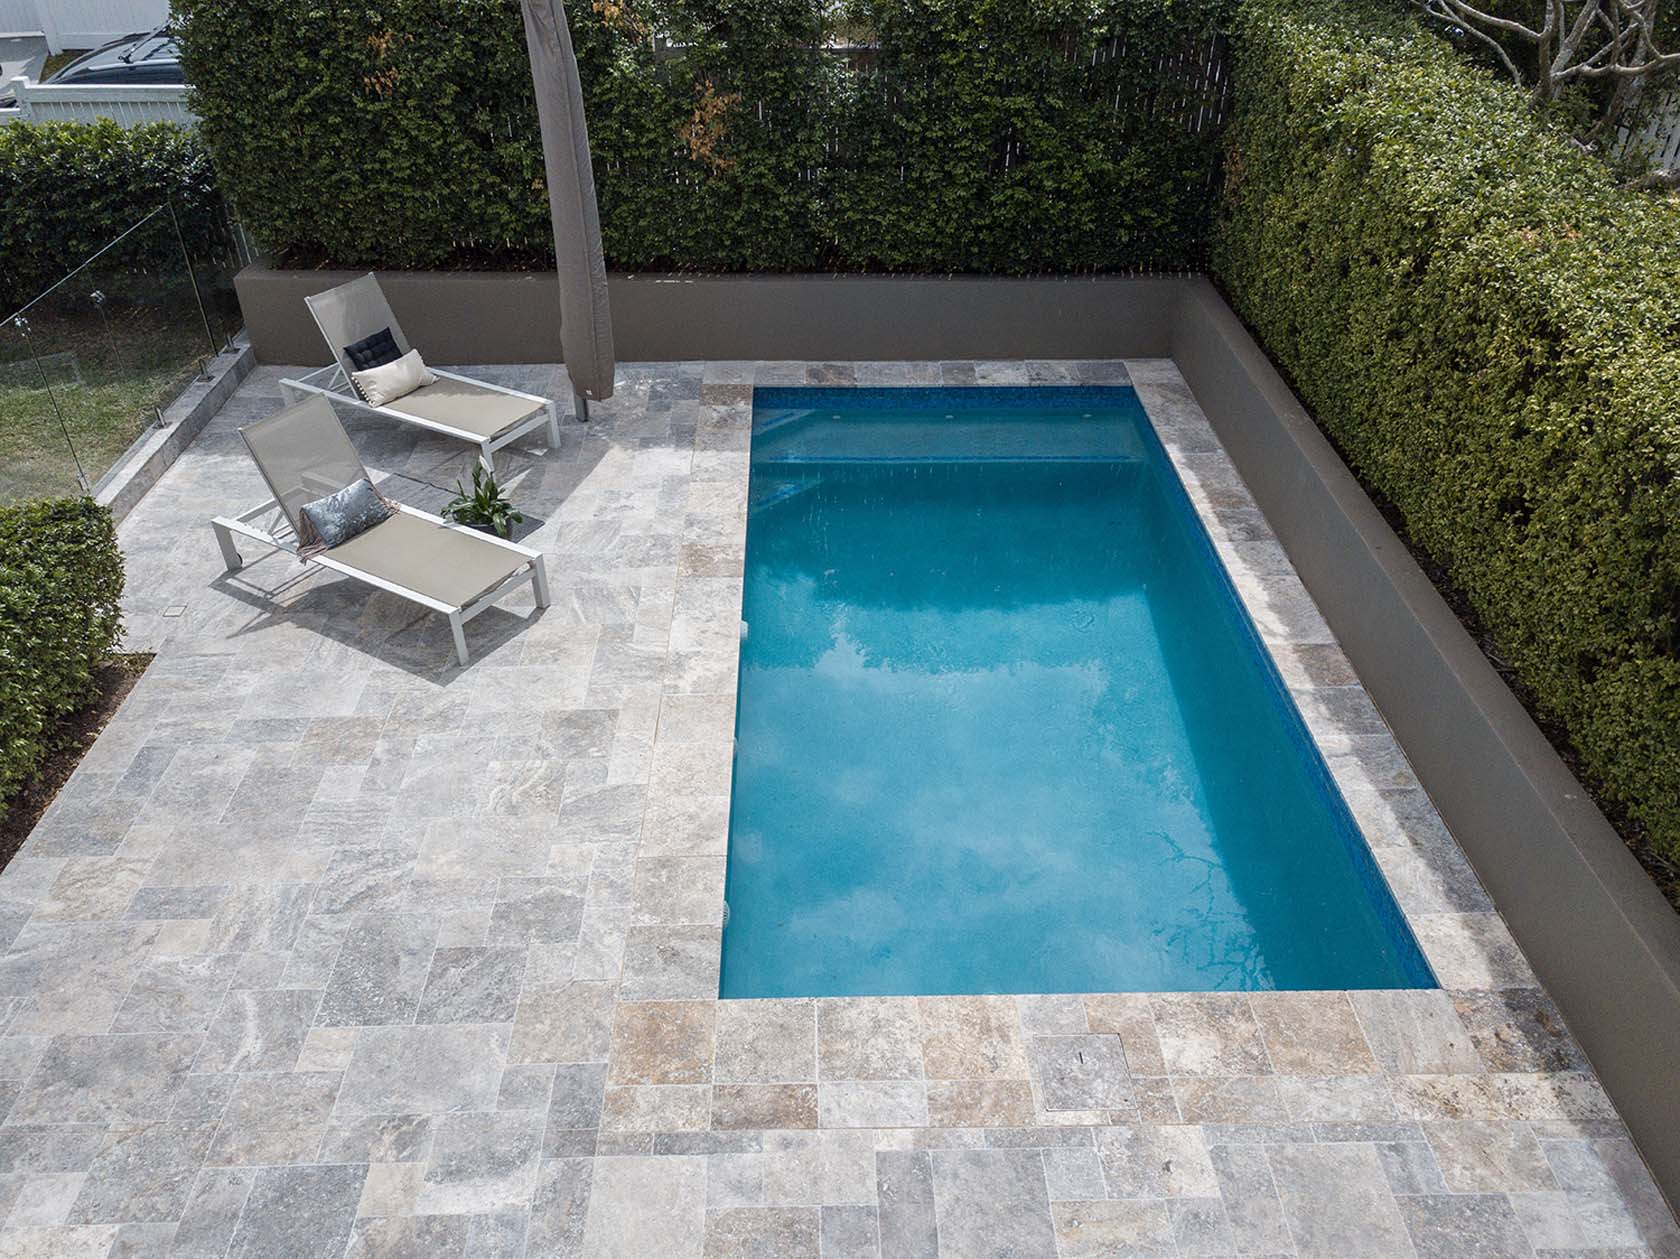 Silver Travertine pool coping and french pattern surrounds